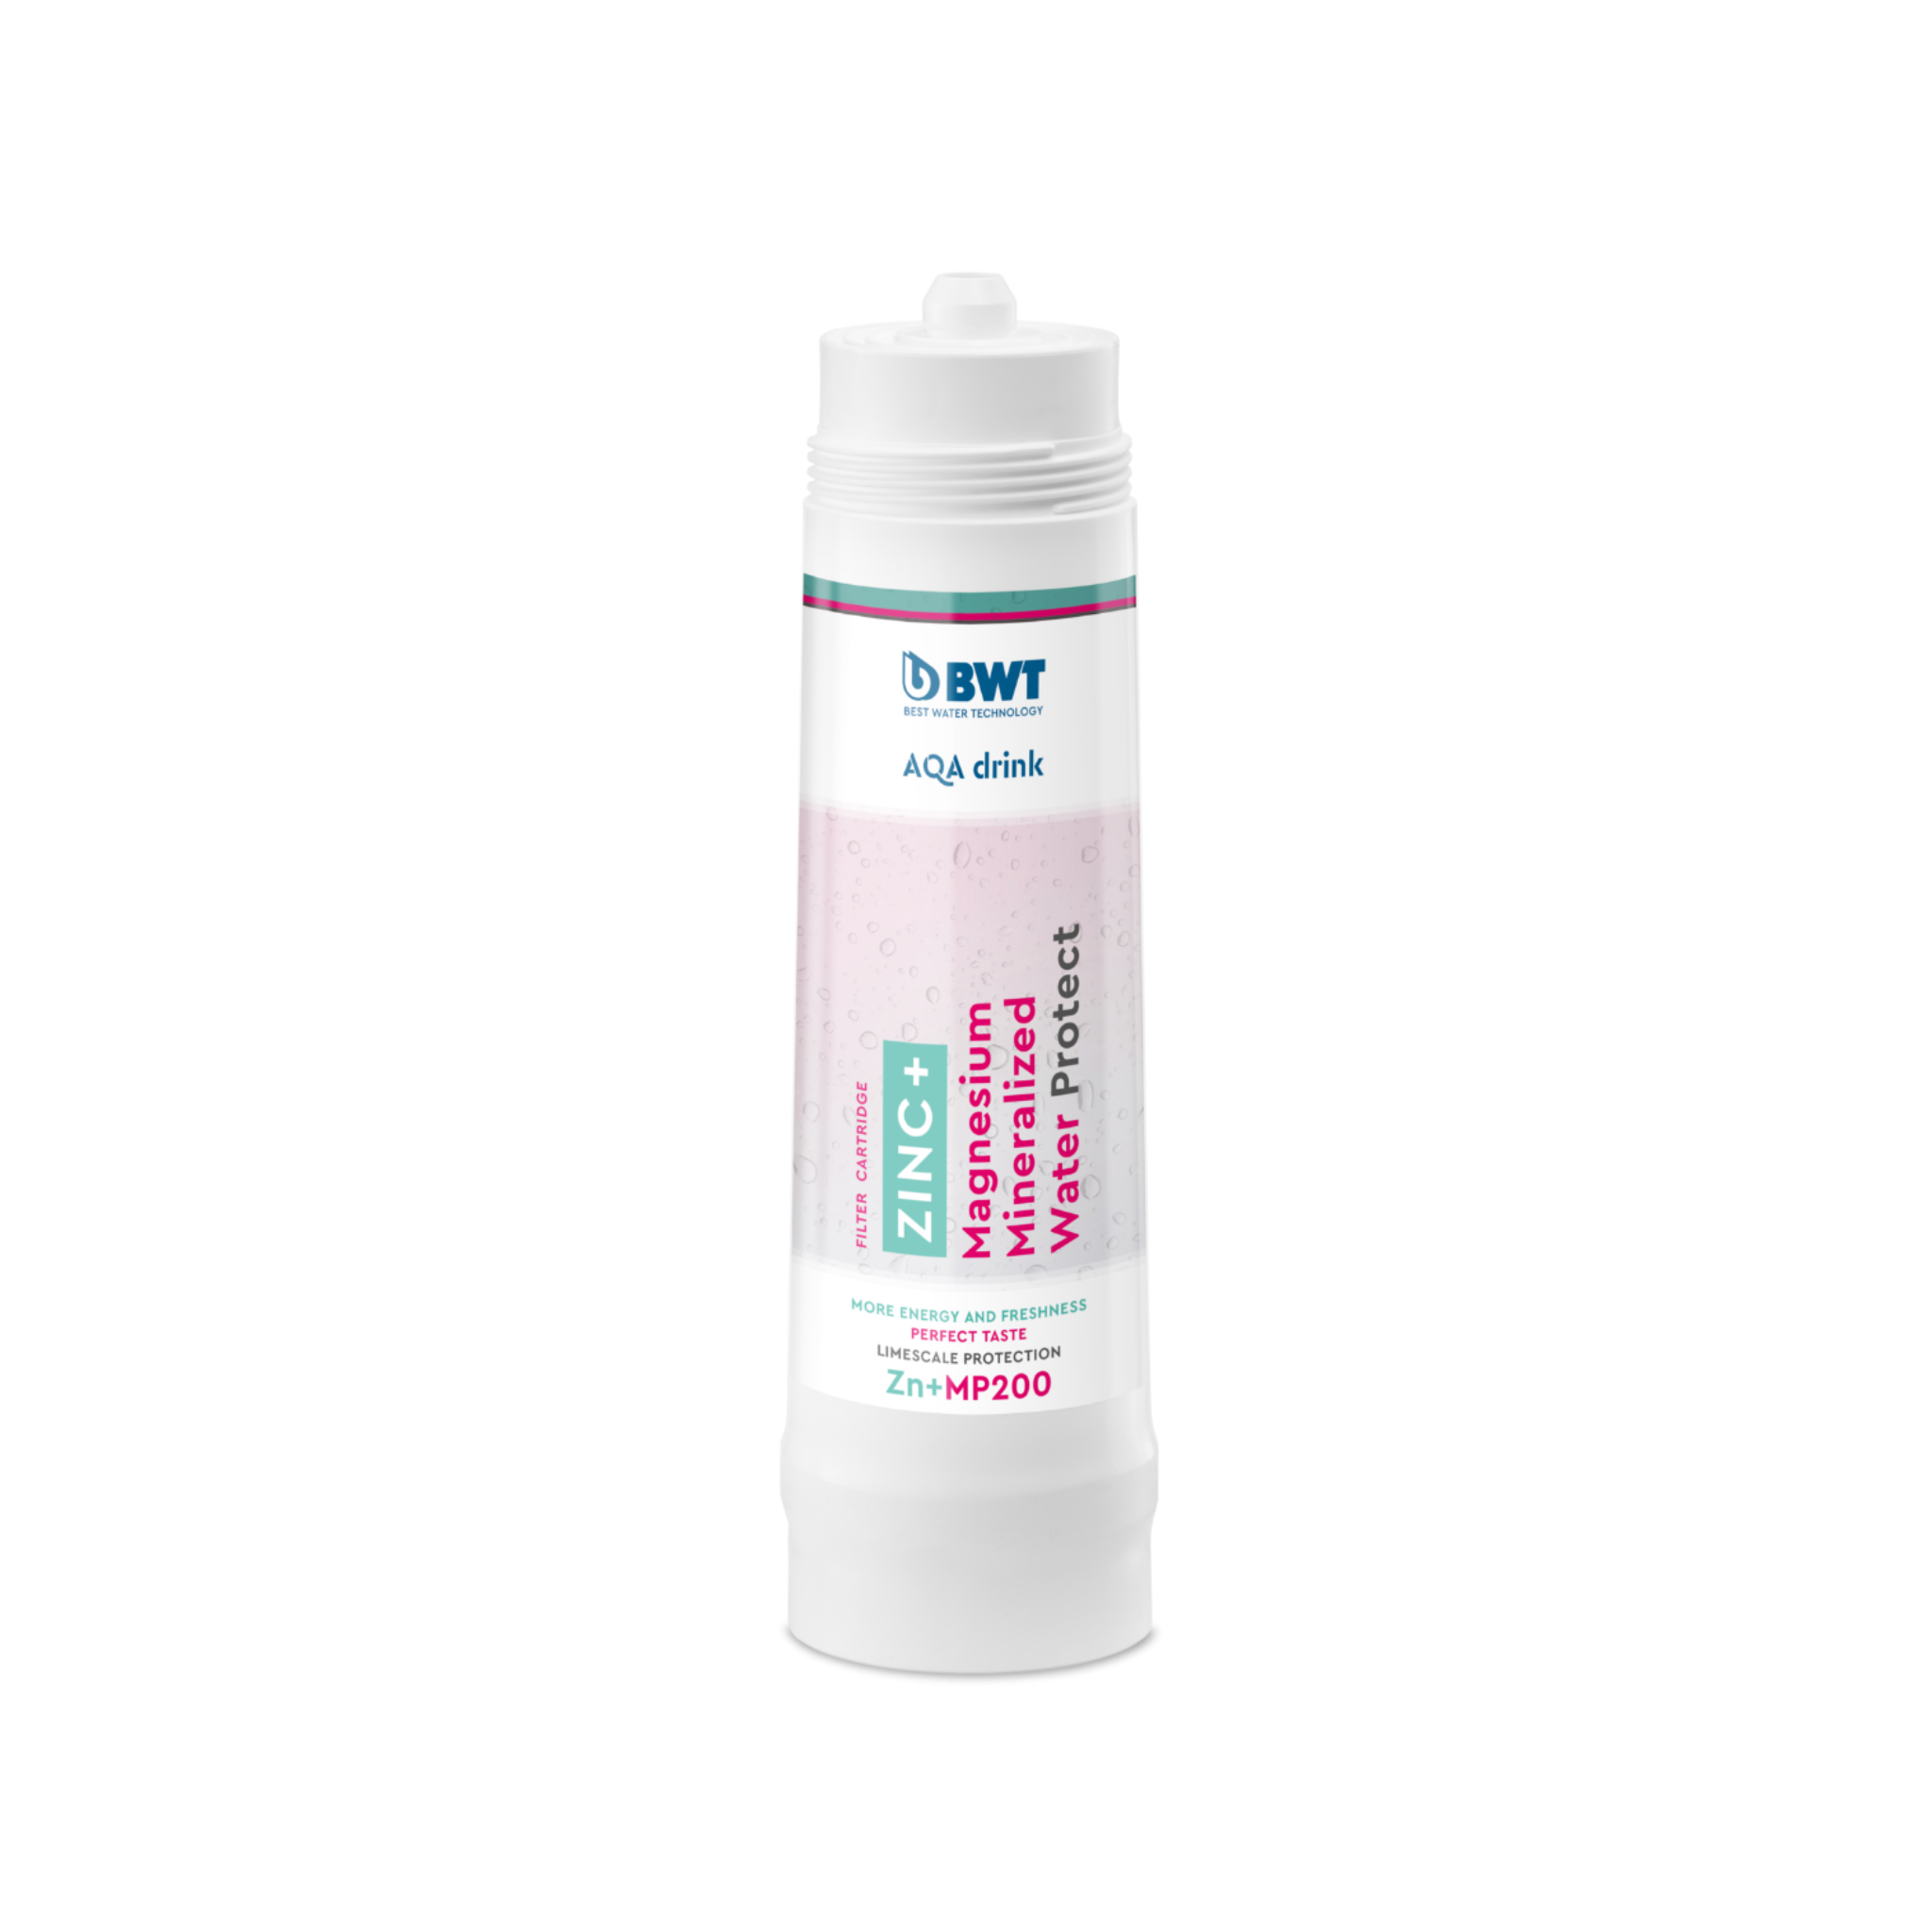 BWT AQA drink ZINC + Magnesium Mineralized Water Protect (Zn+MP)